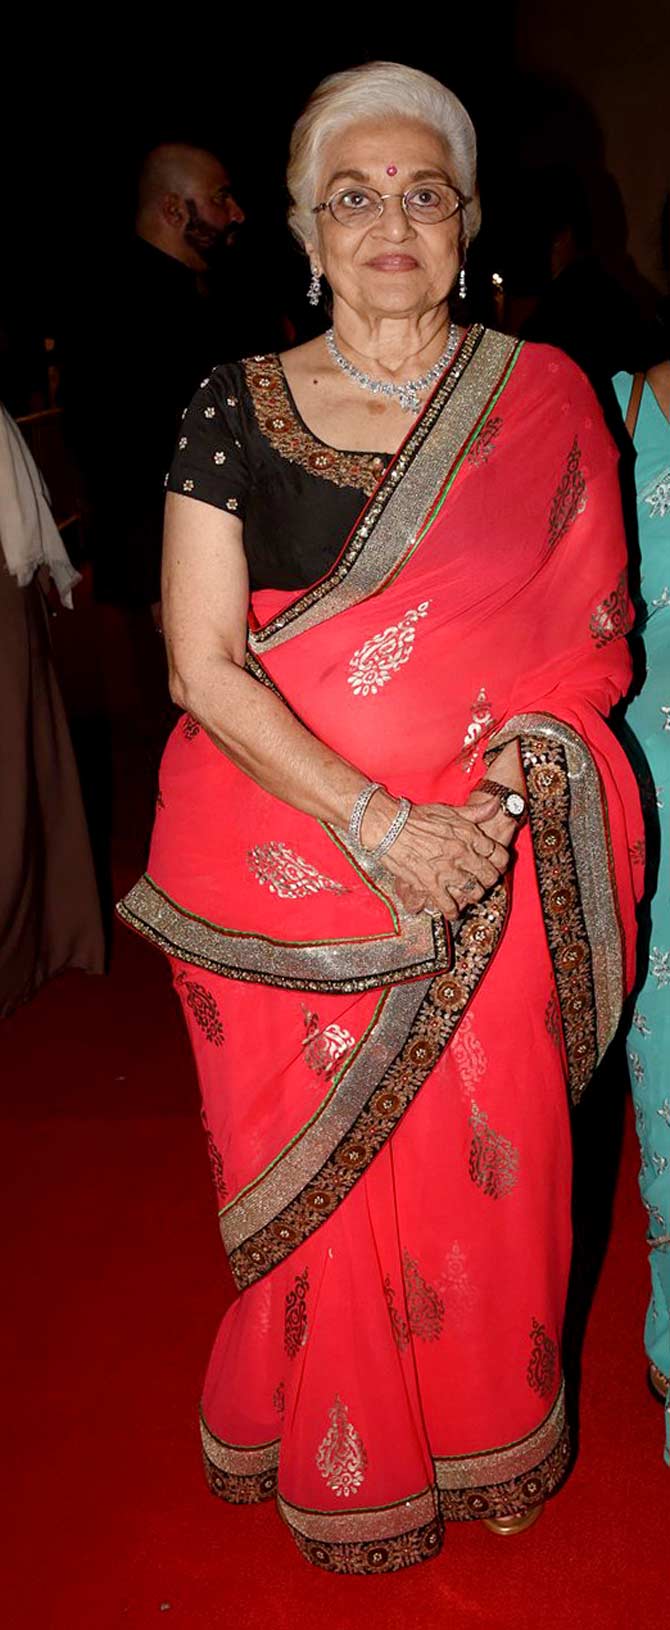 Veteran actress Asha Parekh also attended the event in Oman. The actress looked beautiful as ever in a pretty pink sari.